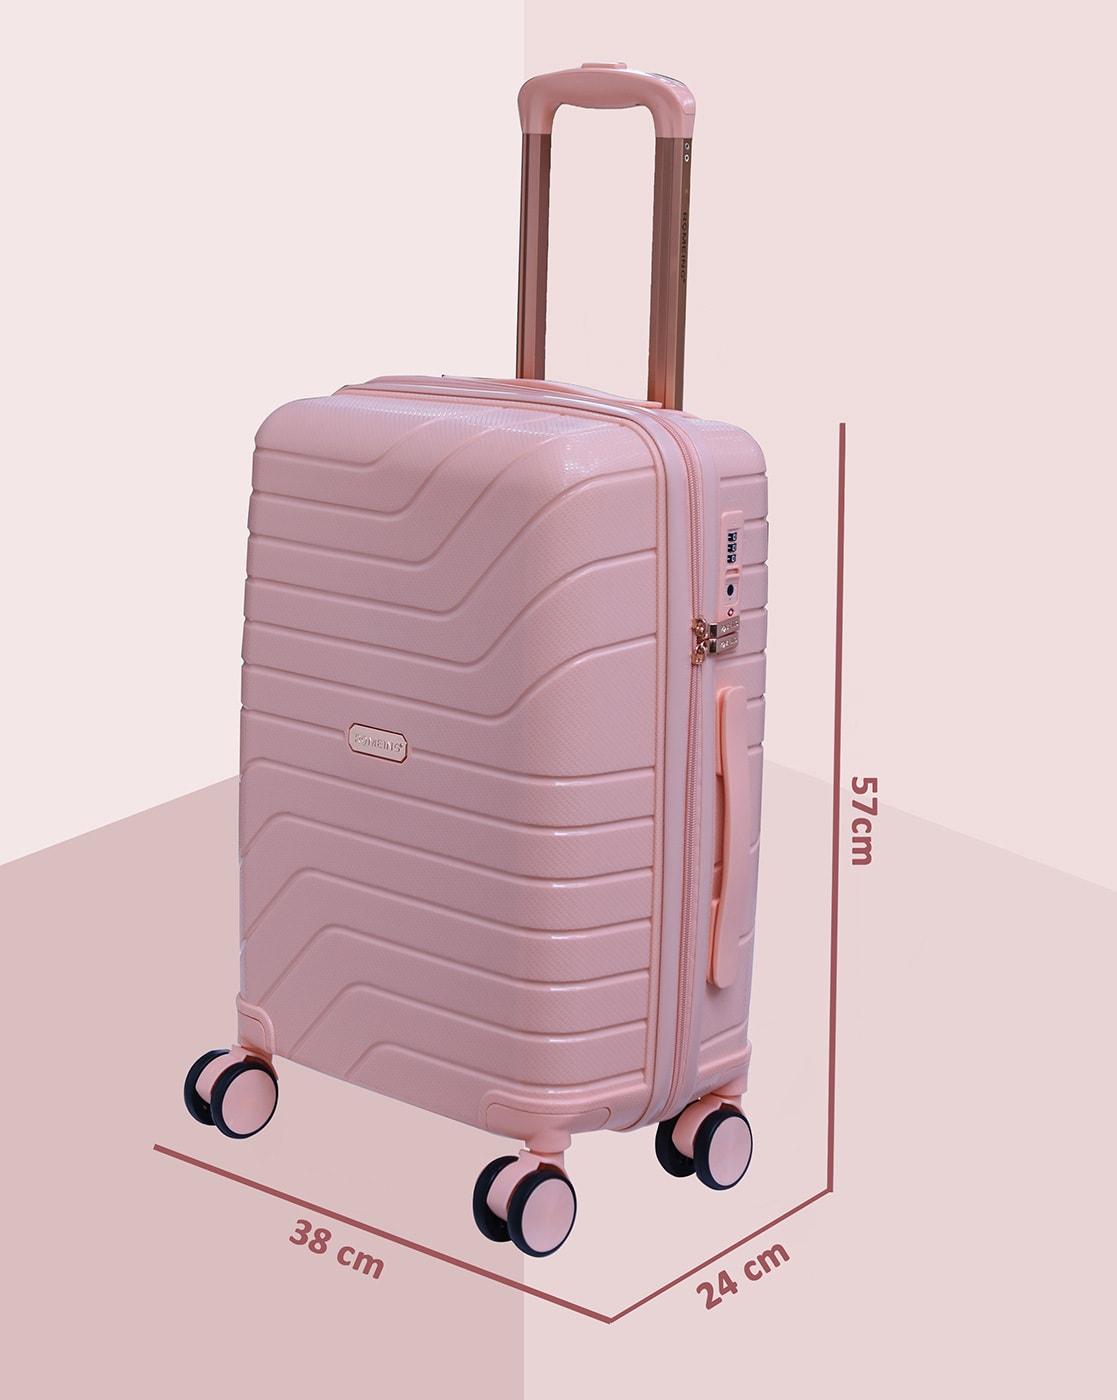 ROMEING Tuscany 24 inch, Polypropylene Luggage, Hard-Sided, (Coral 65 cms)  Check-in Trolley Bag : Amazon.in: Fashion